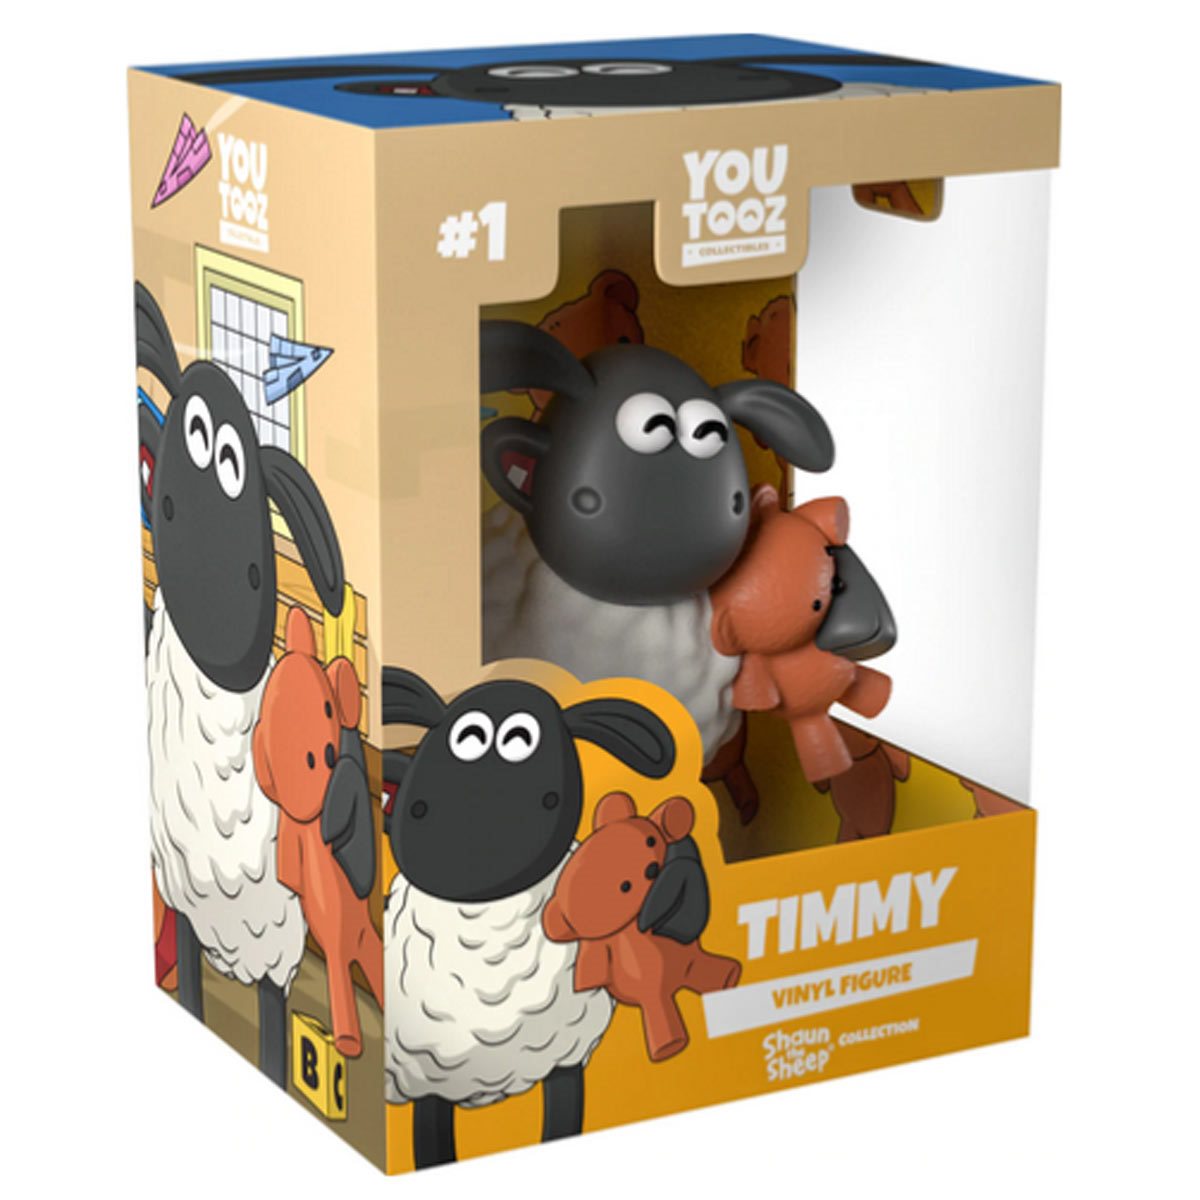 Shaun the Sheep Collection Timmy Vinyl Figure #1